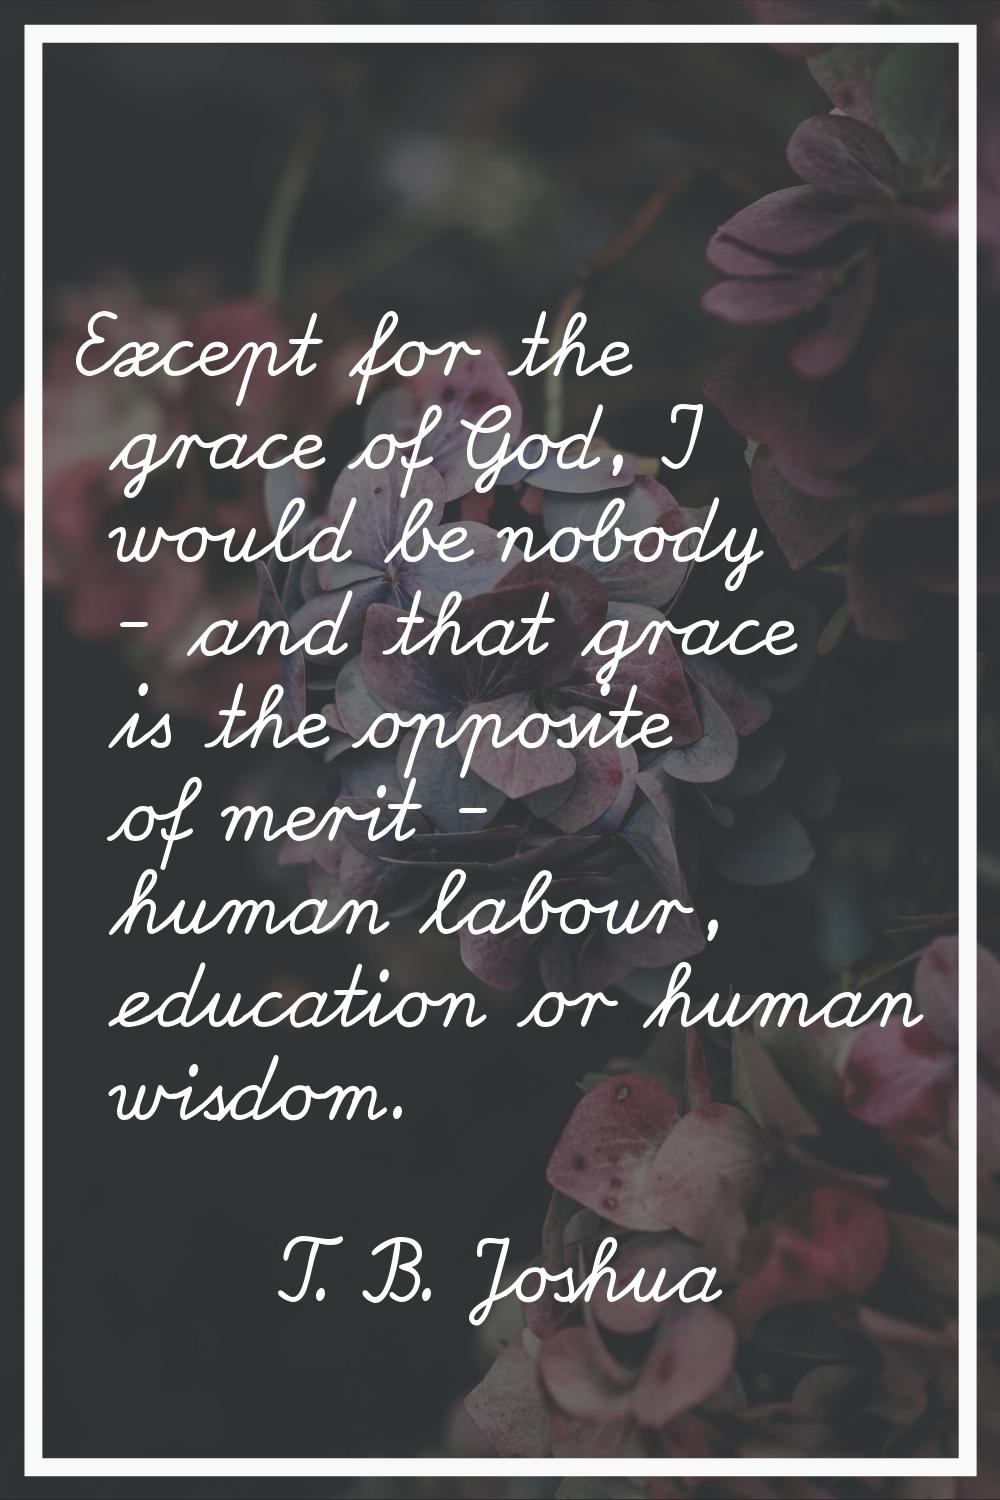 Except for the grace of God, I would be nobody - and that grace is the opposite of merit - human la